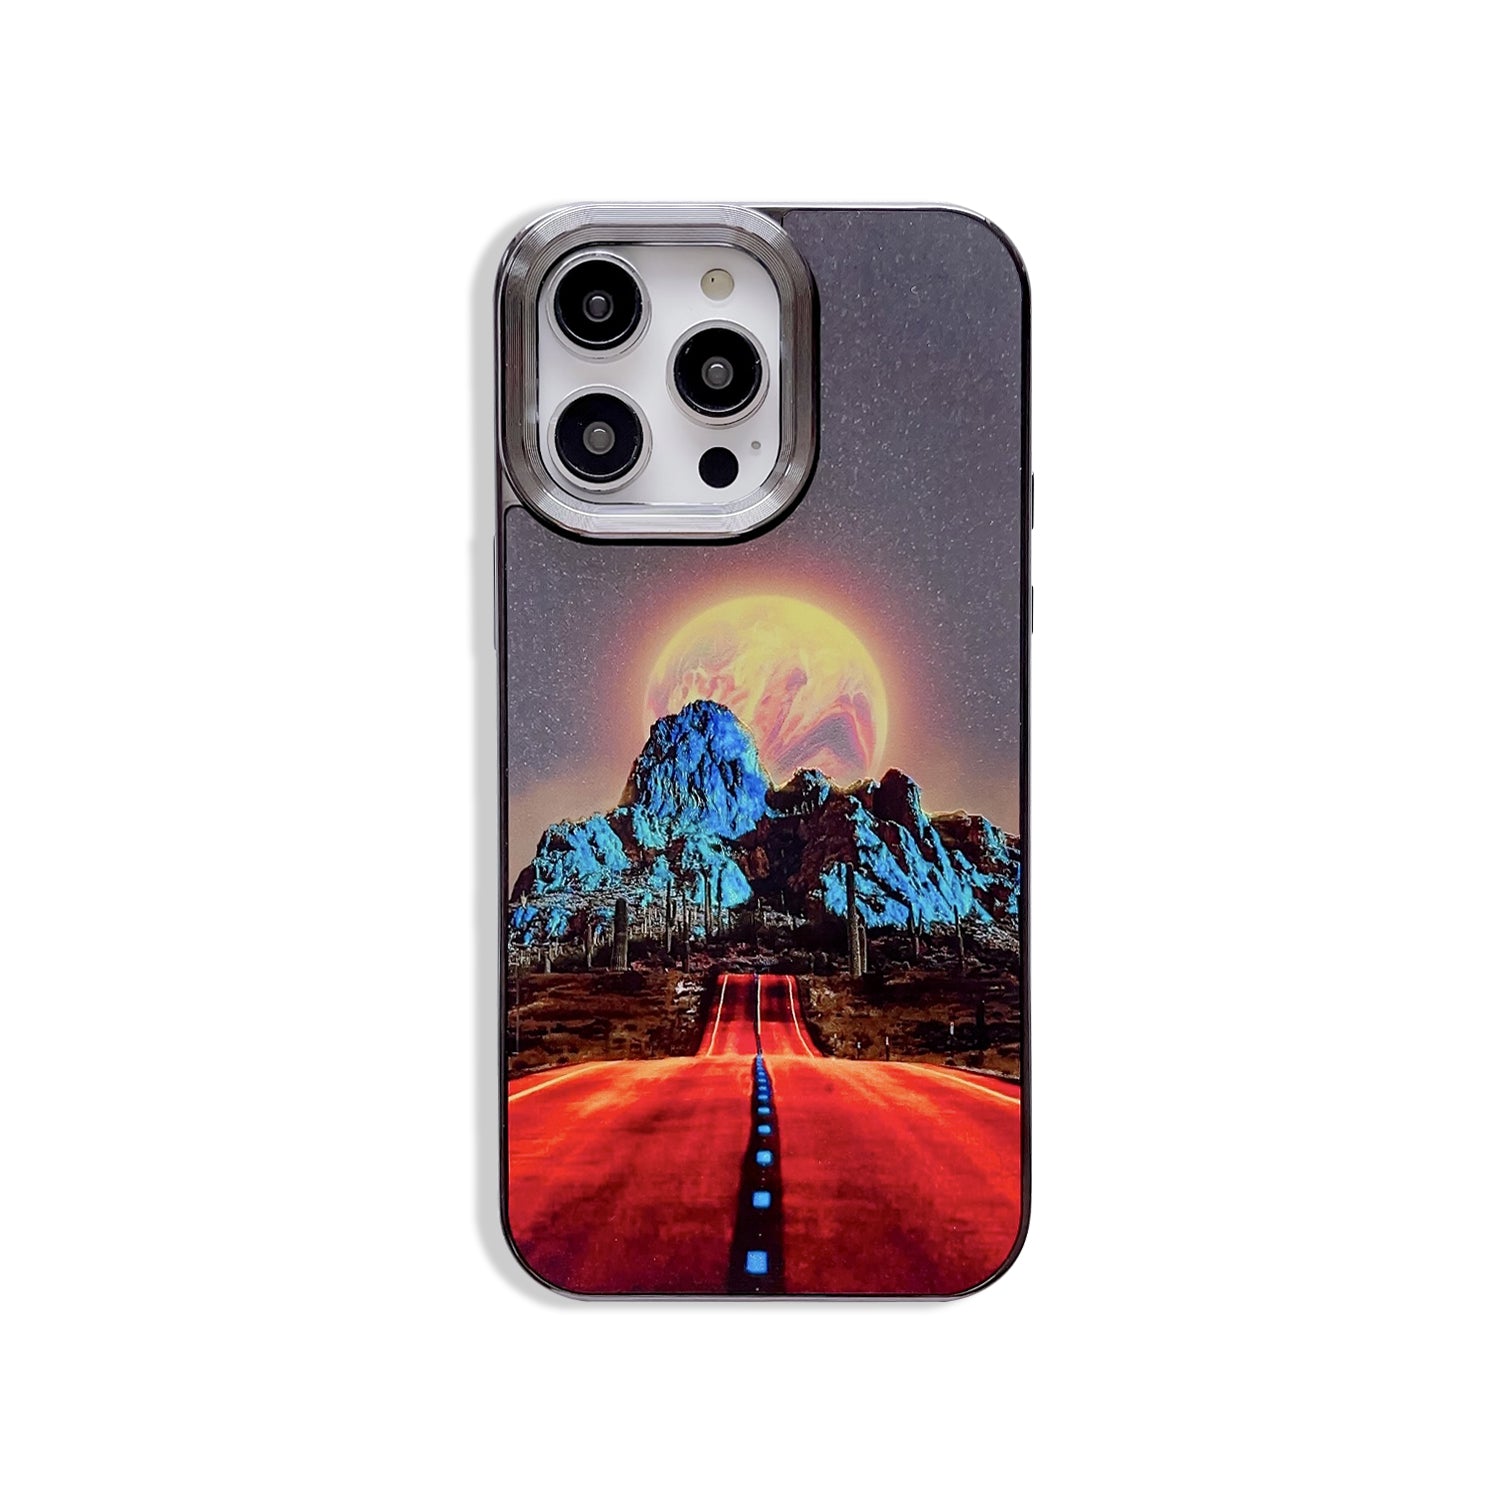 planet iPhone case A45  A46